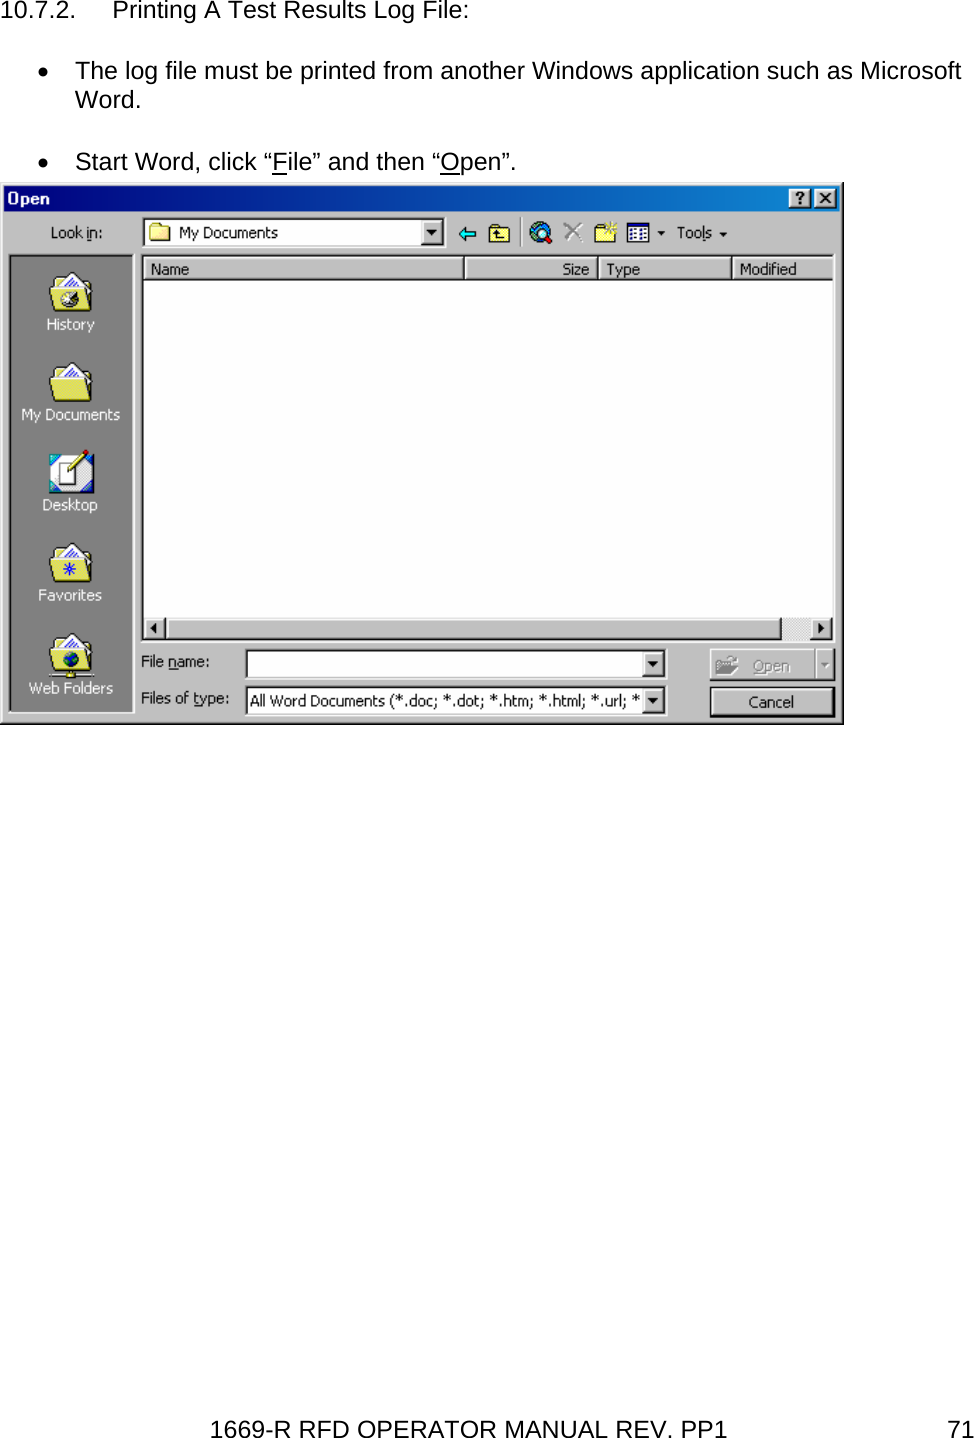 1669-R RFD OPERATOR MANUAL REV. PP1  7110.7.2. Printing A Test Results Log File: •  The log file must be printed from another Windows application such as Microsoft Word. •  Start Word, click “File” and then “Open”.   